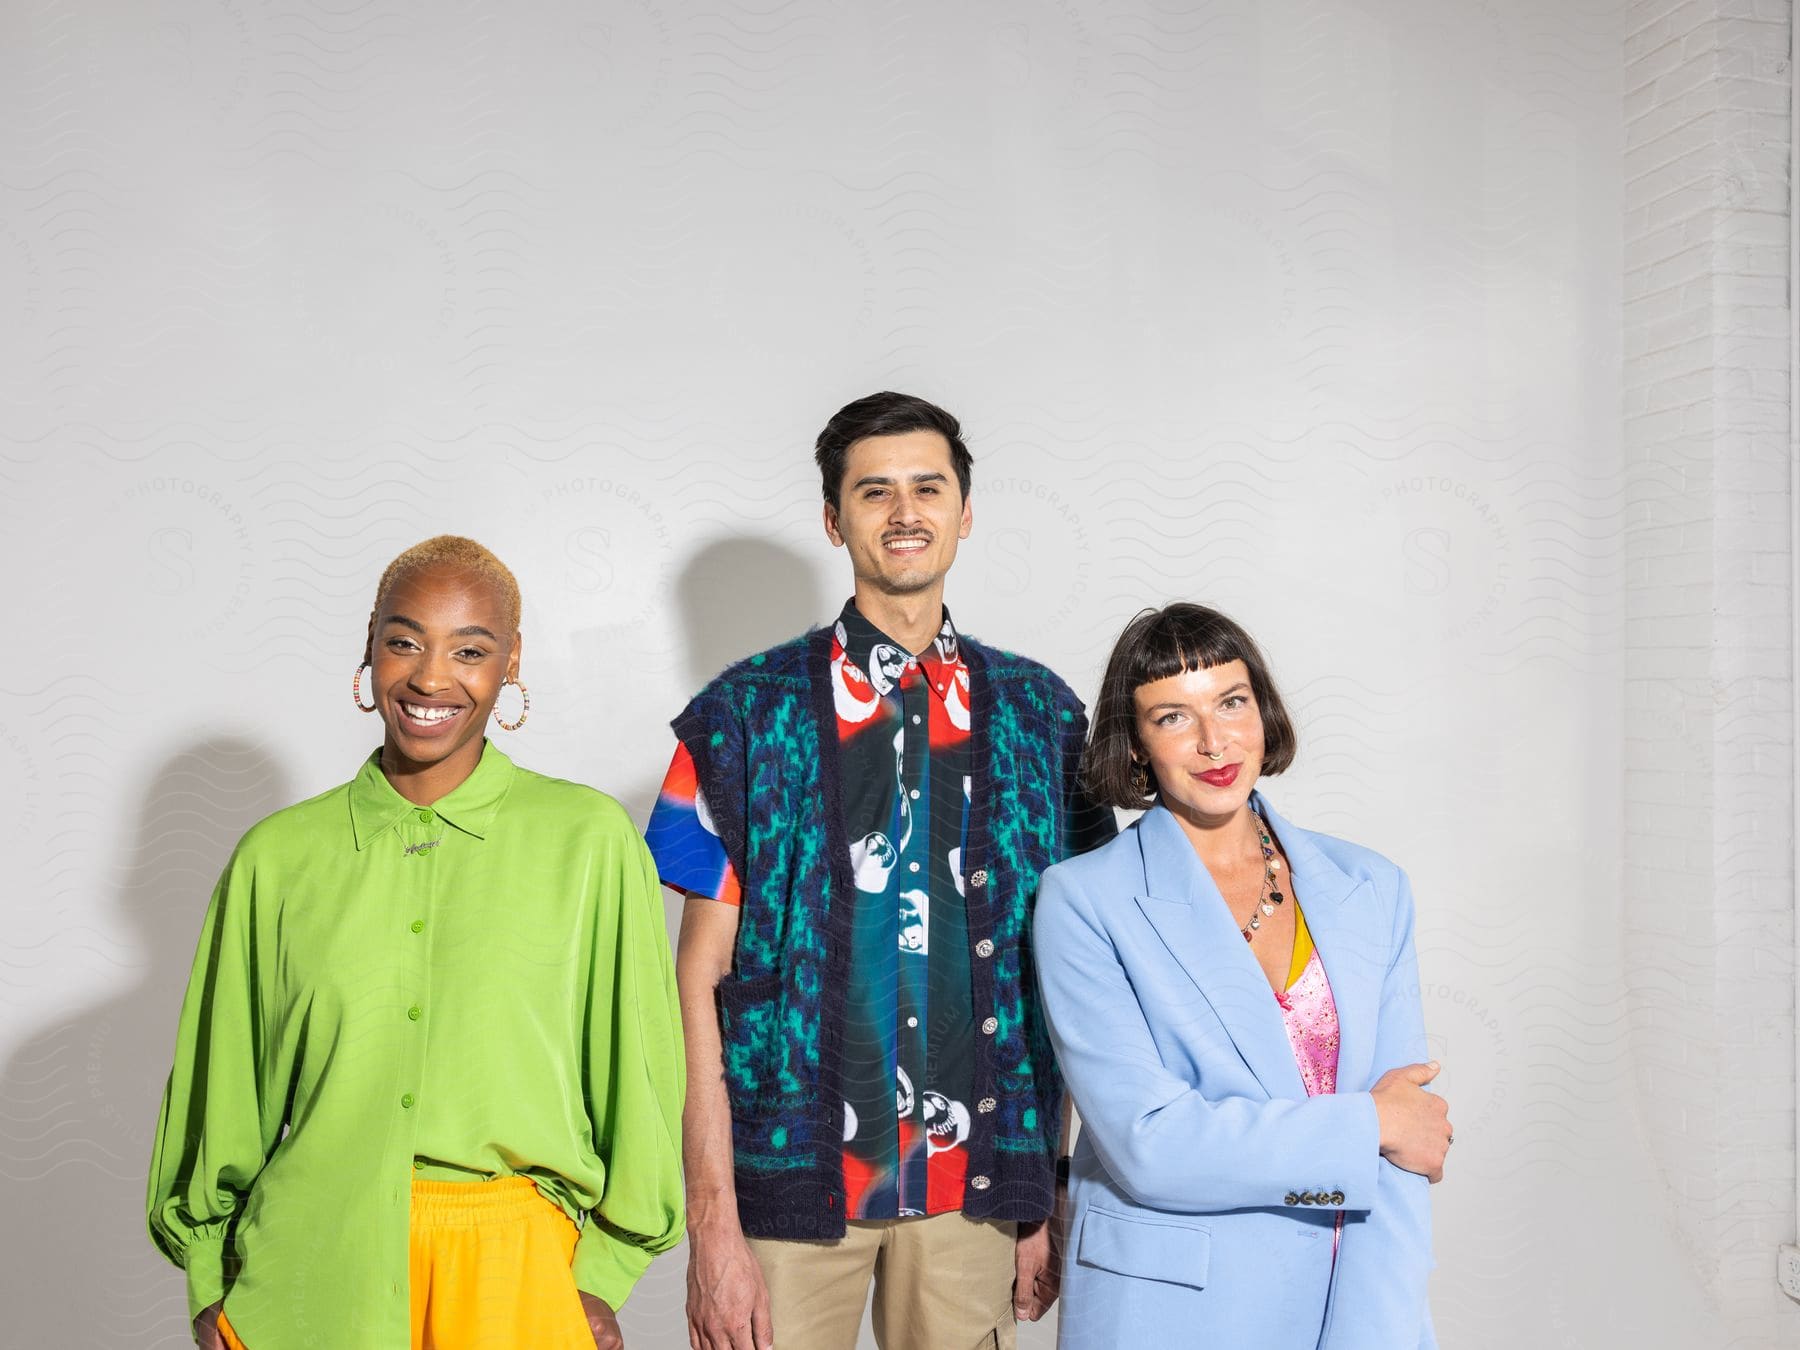 Three brightly clothed people smiling in a group.